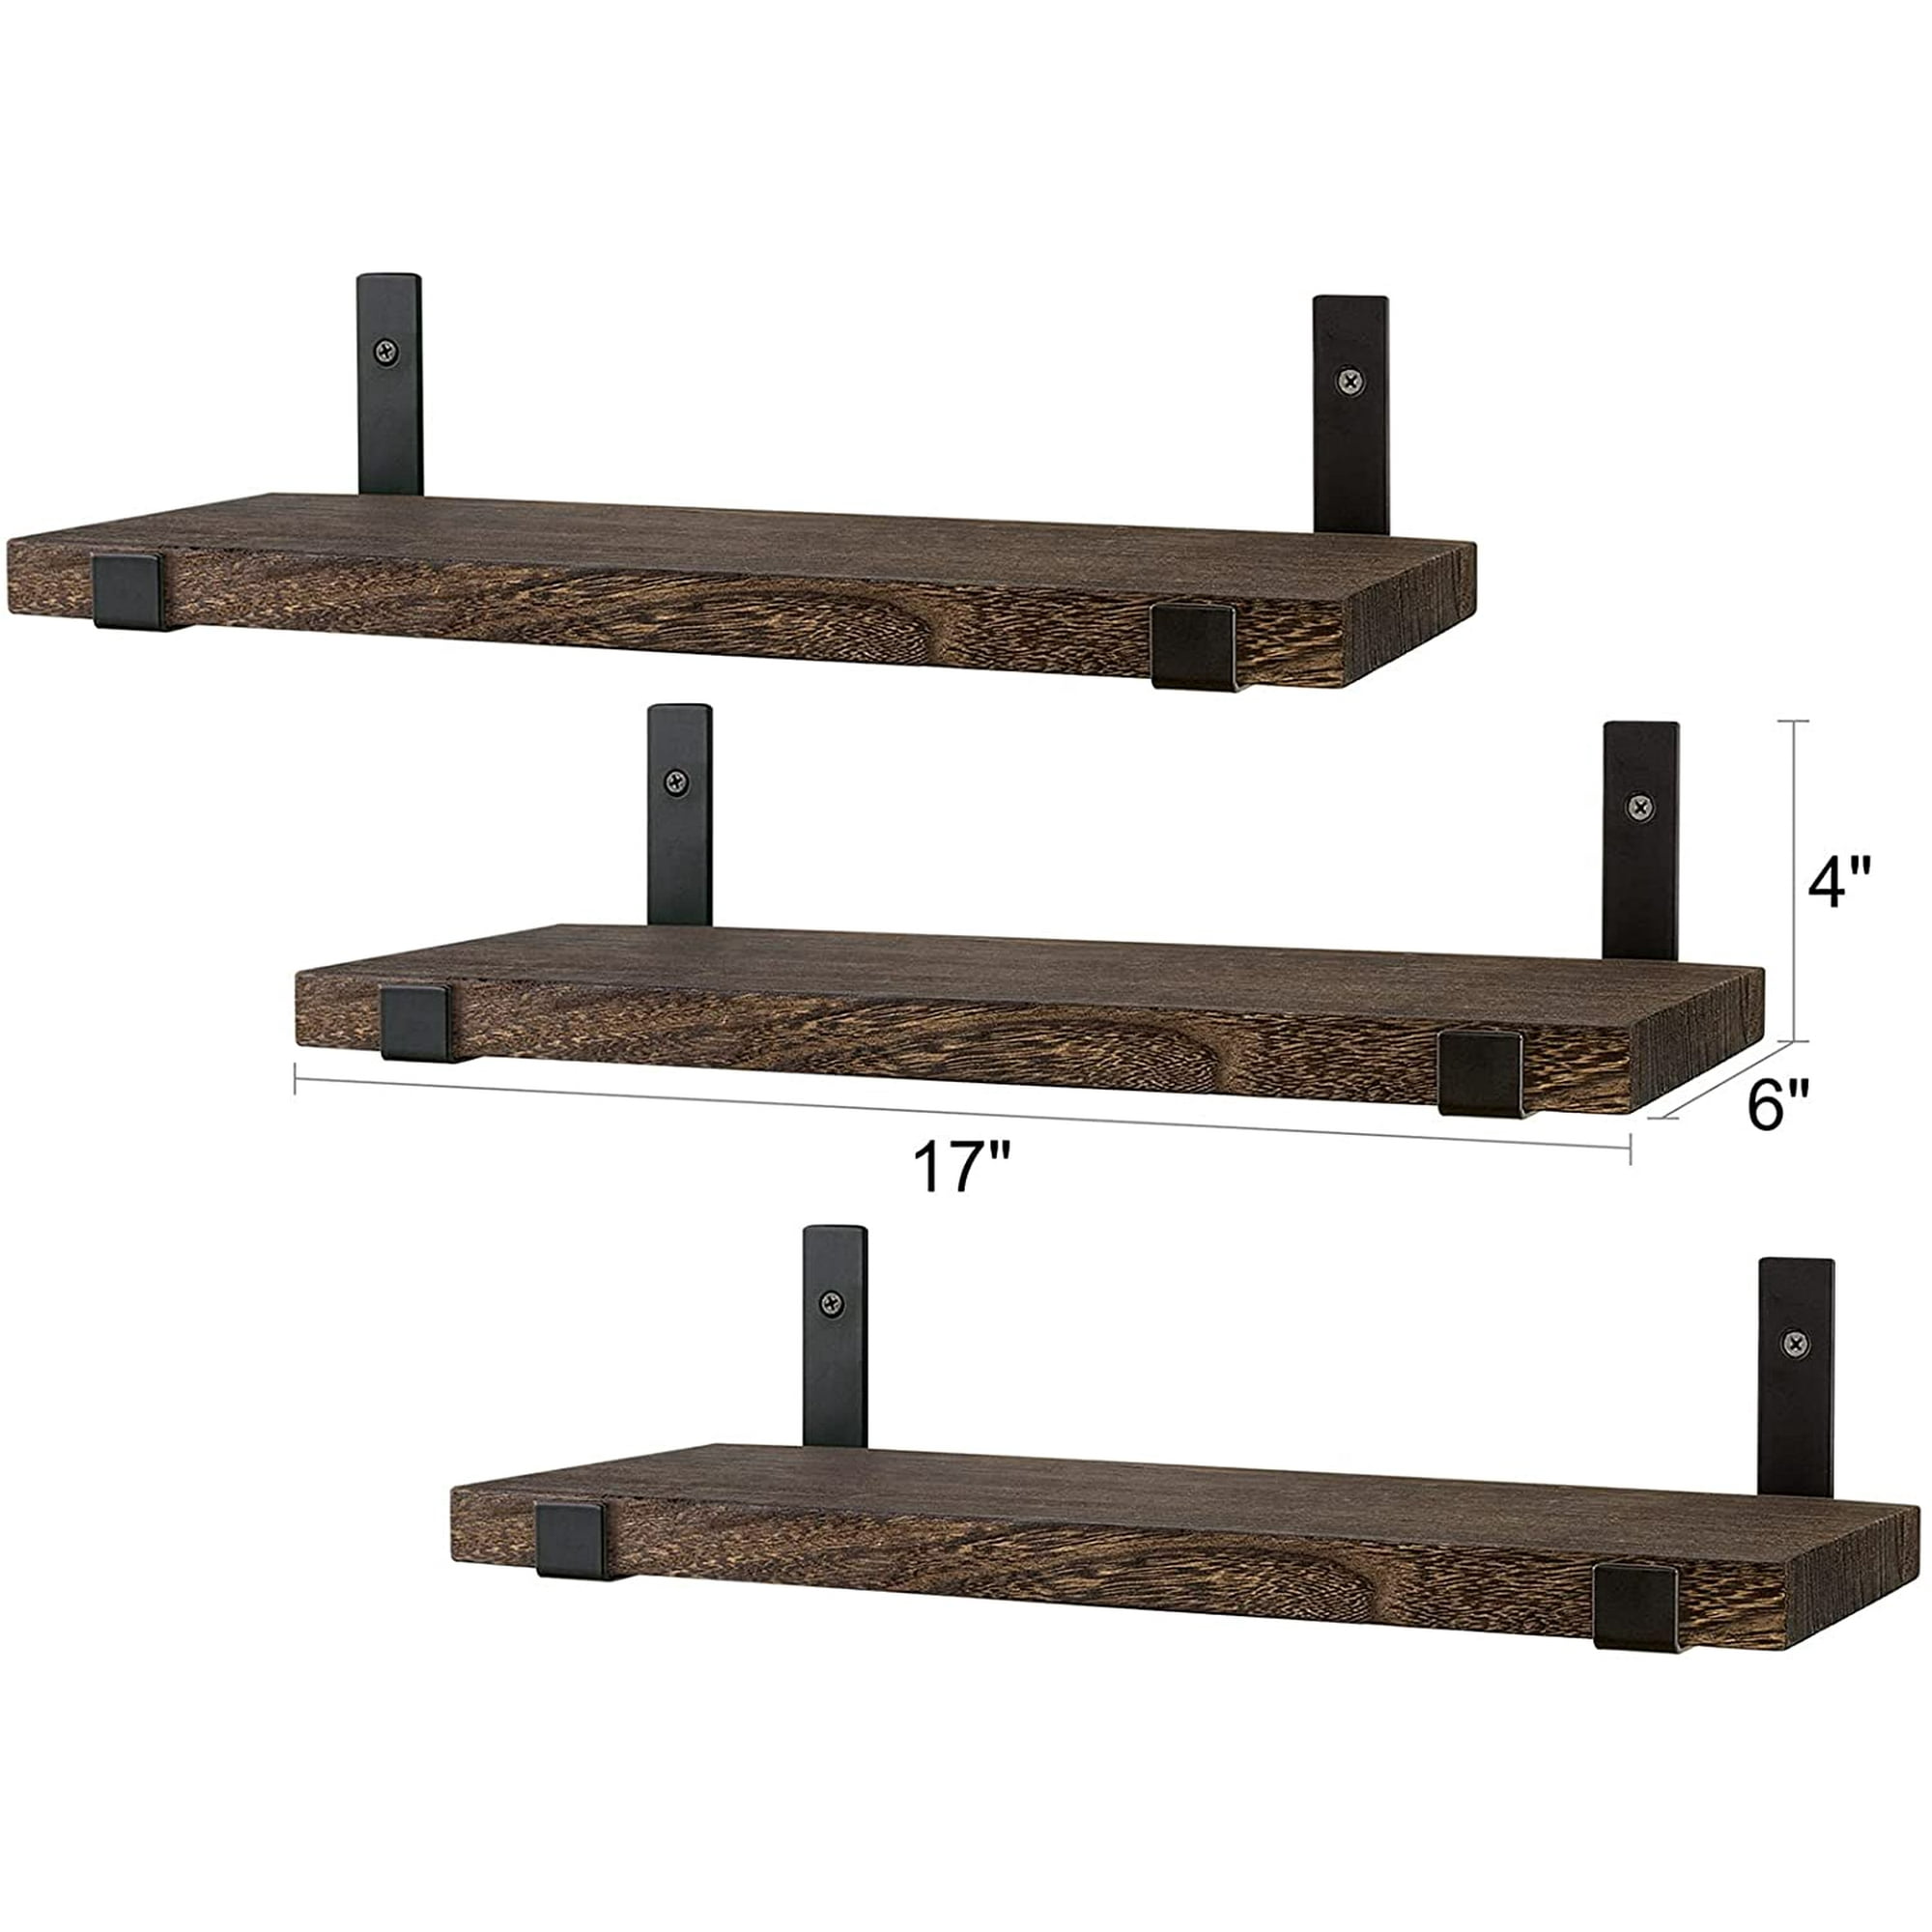 Rustic Wood Floating Shelves Wall, Floating Shelves With Lip